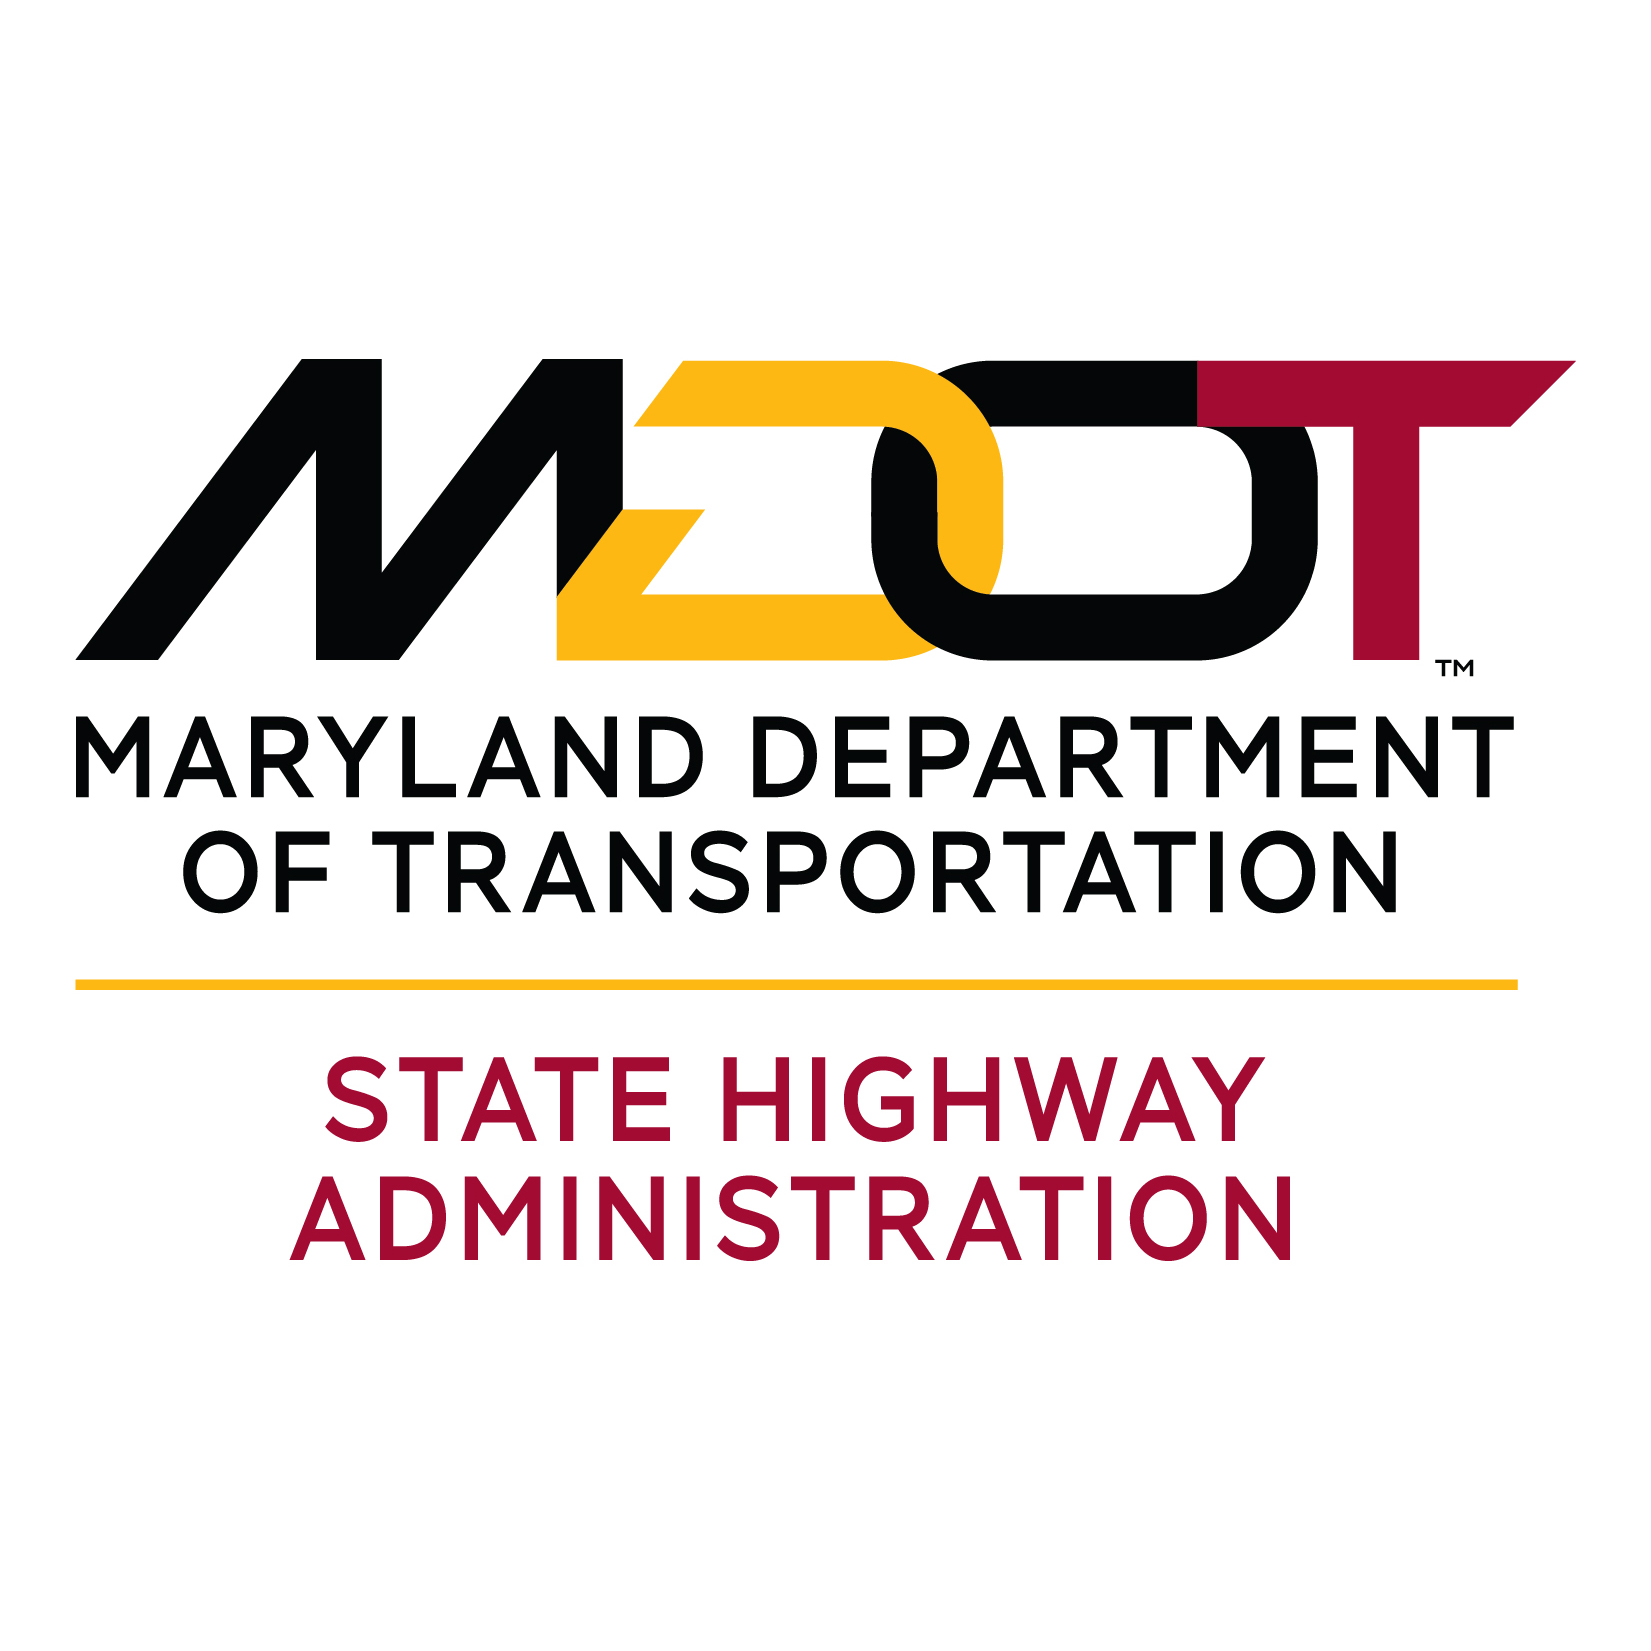 Work To Begin Soon On Safety Improvements To Interchanges In Maryland